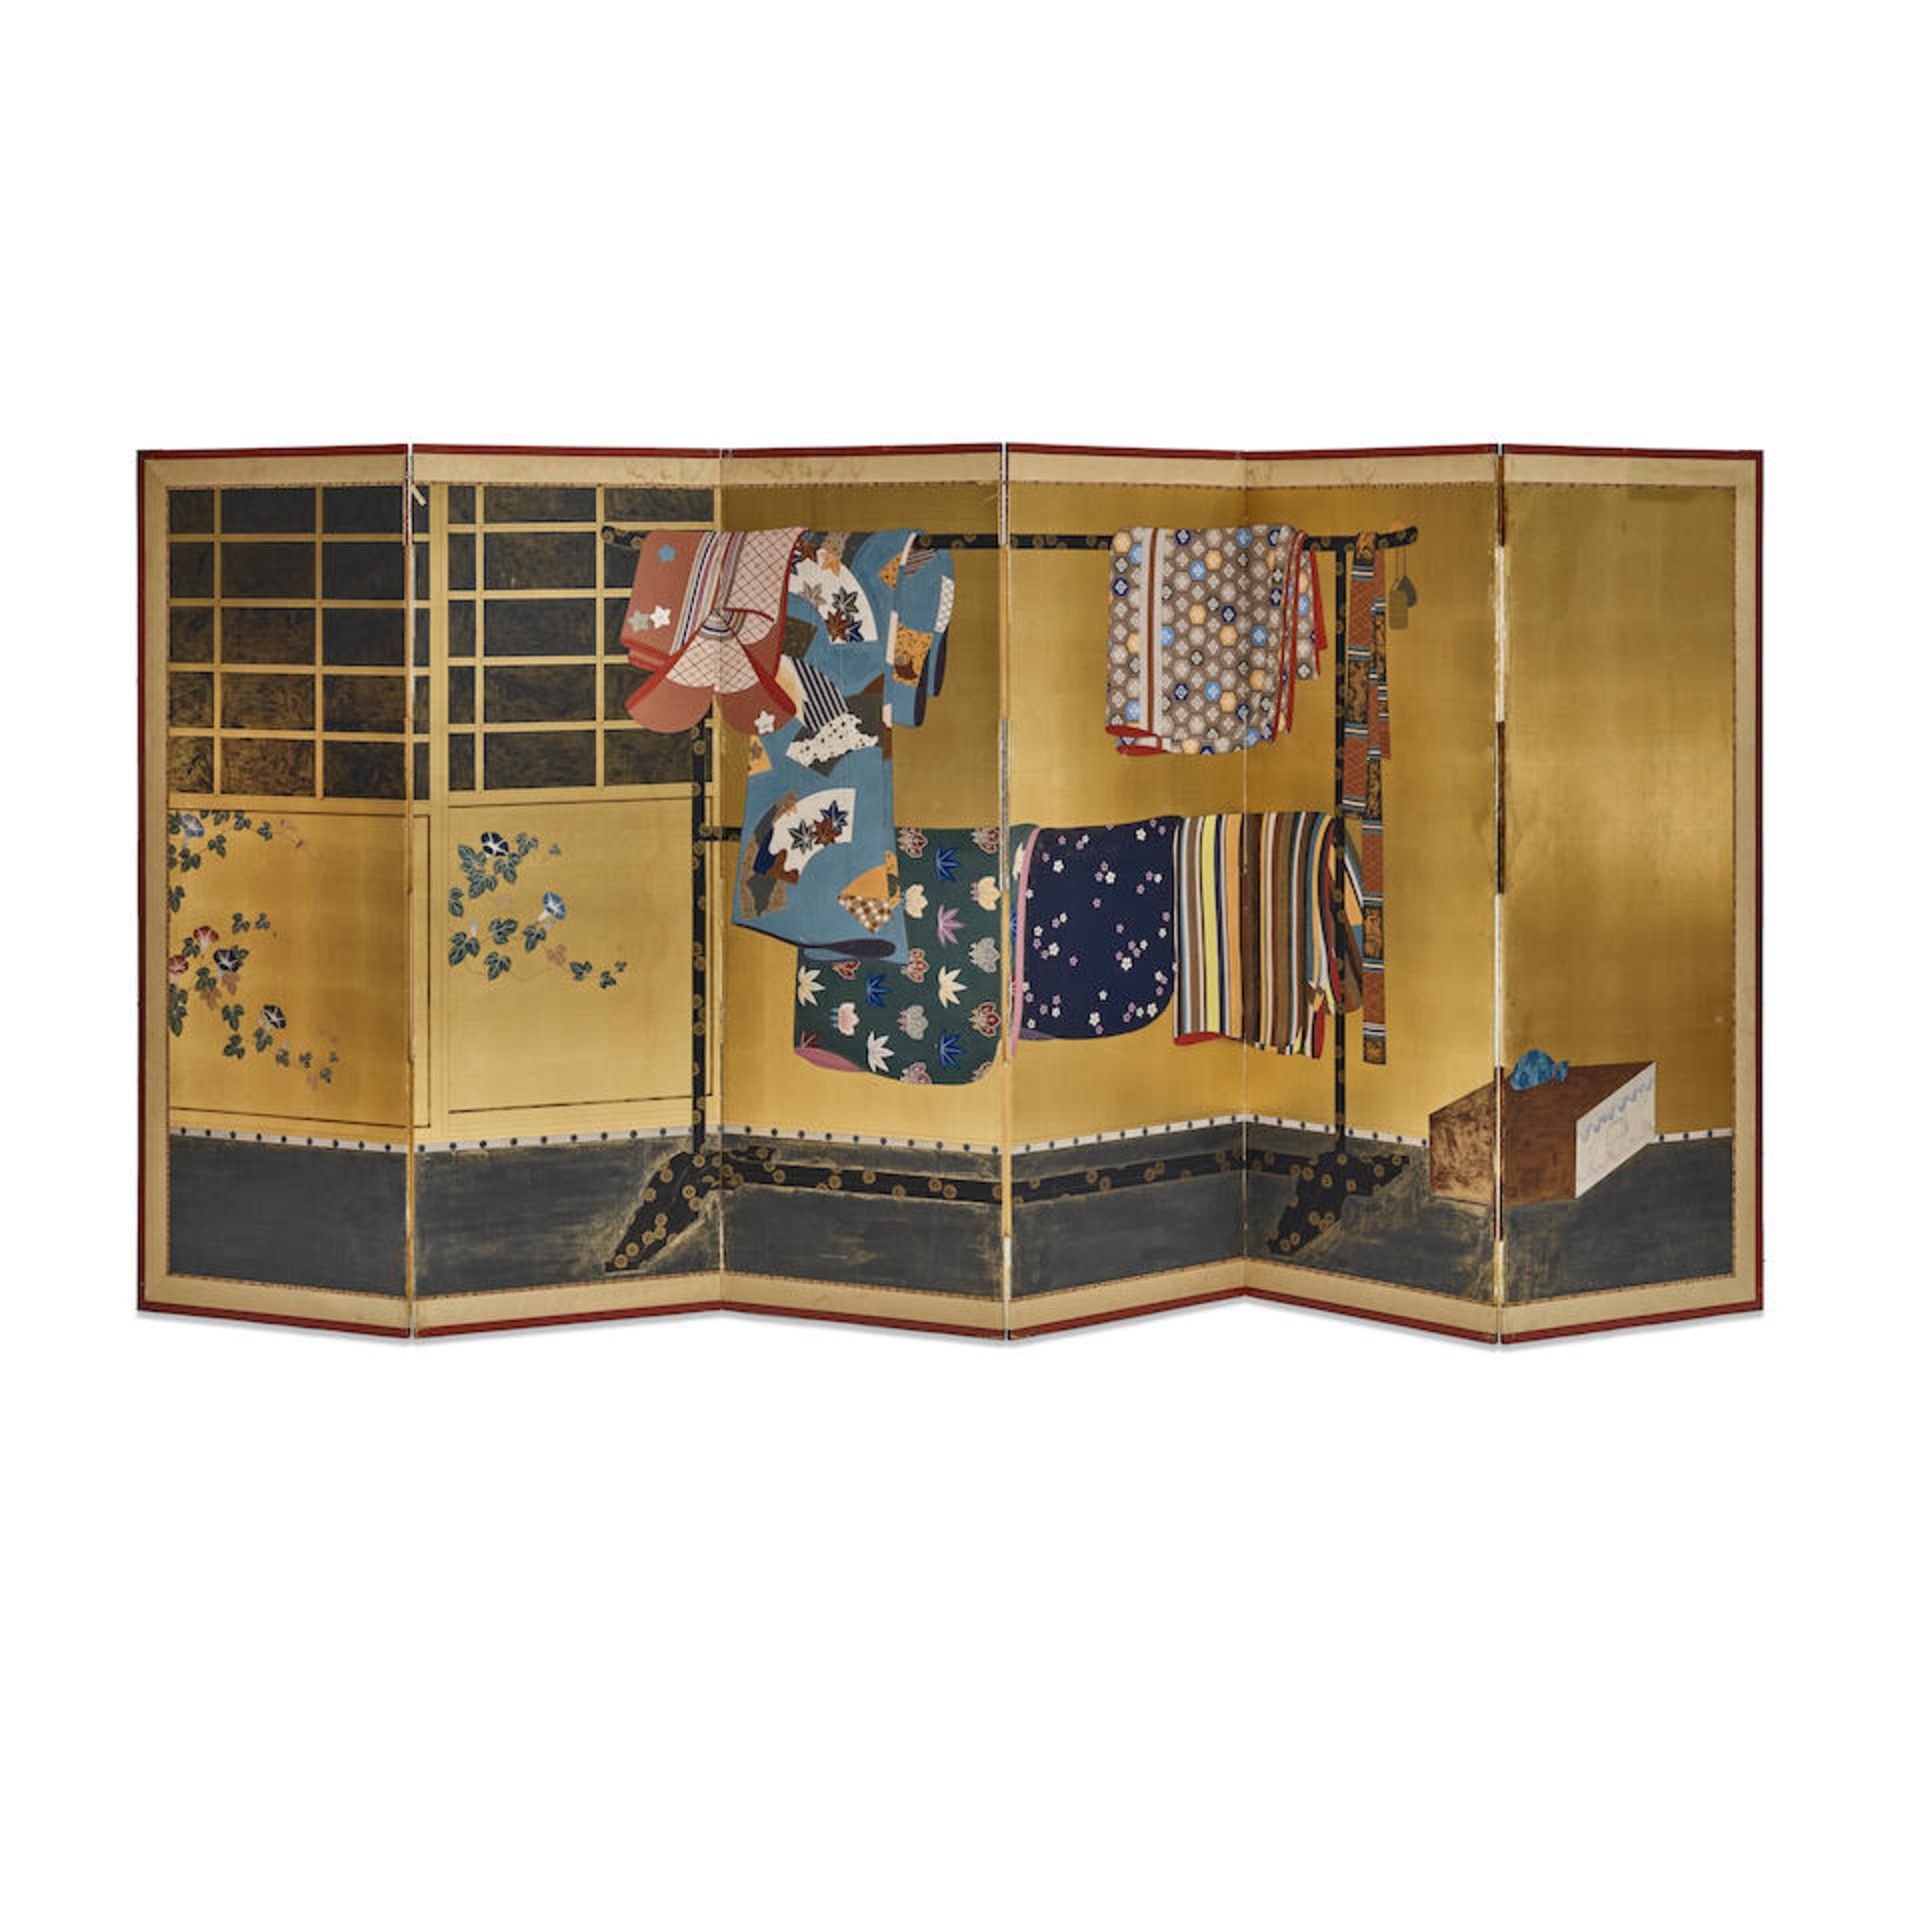 A JAPANESE PAPER ON PIGMENT SIX-PANEL SCREENLate 19th/early 20th century